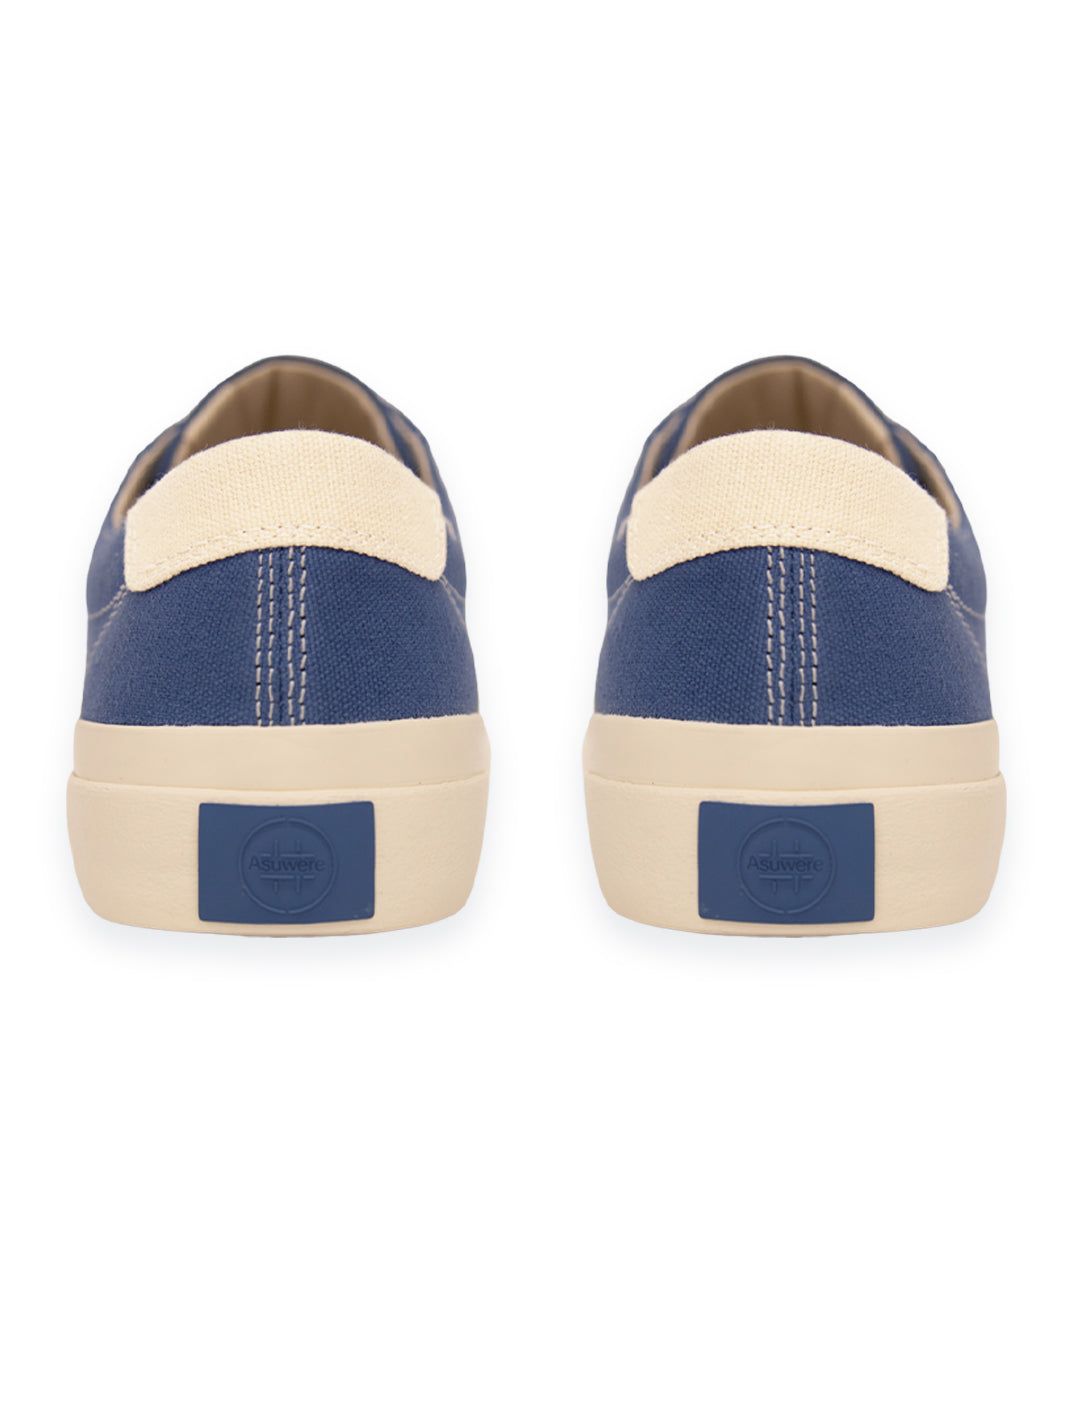 Collective Canvas x Asuwere Vier - Steel Blue